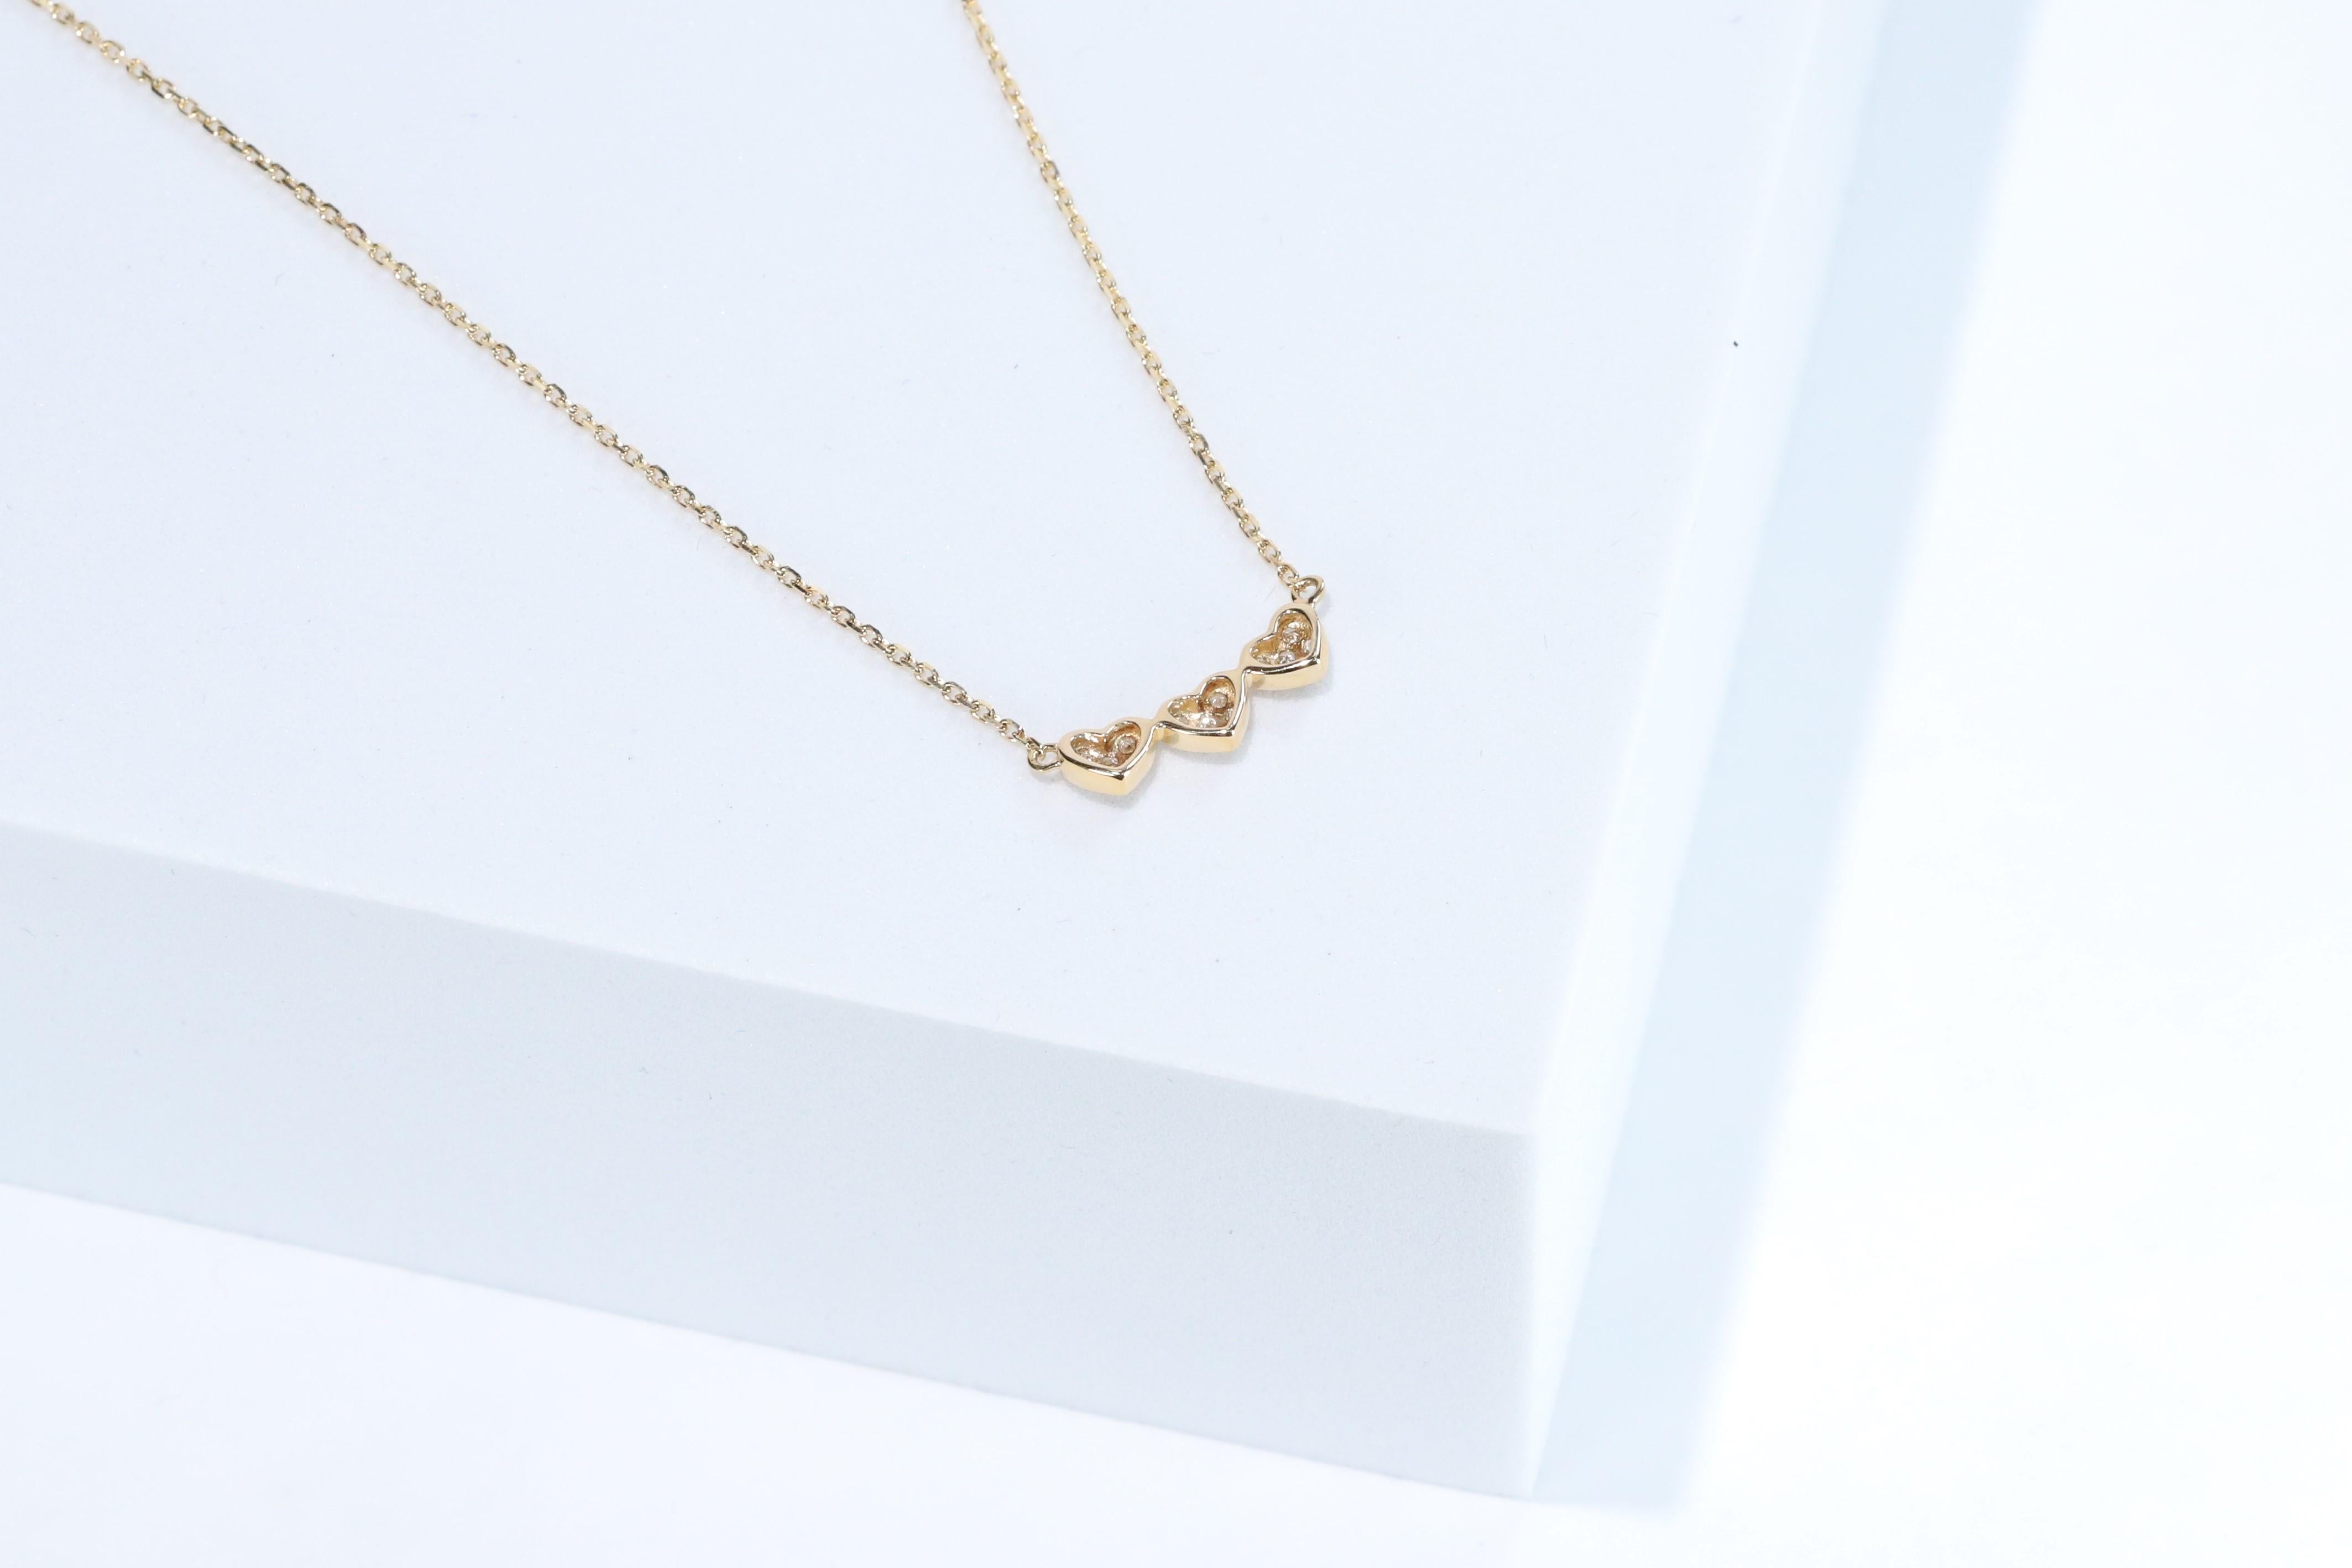 Decorate yourself in elegance with this Pendant is crafted from 14-karat Yellow Gold by Gin & Grace. This Pendant is made up of Round-cut White Diamond (18 Pcs) 0.15 Carat. This Pendant is weight 1.85 grams. This delicate Pendant is polished to a